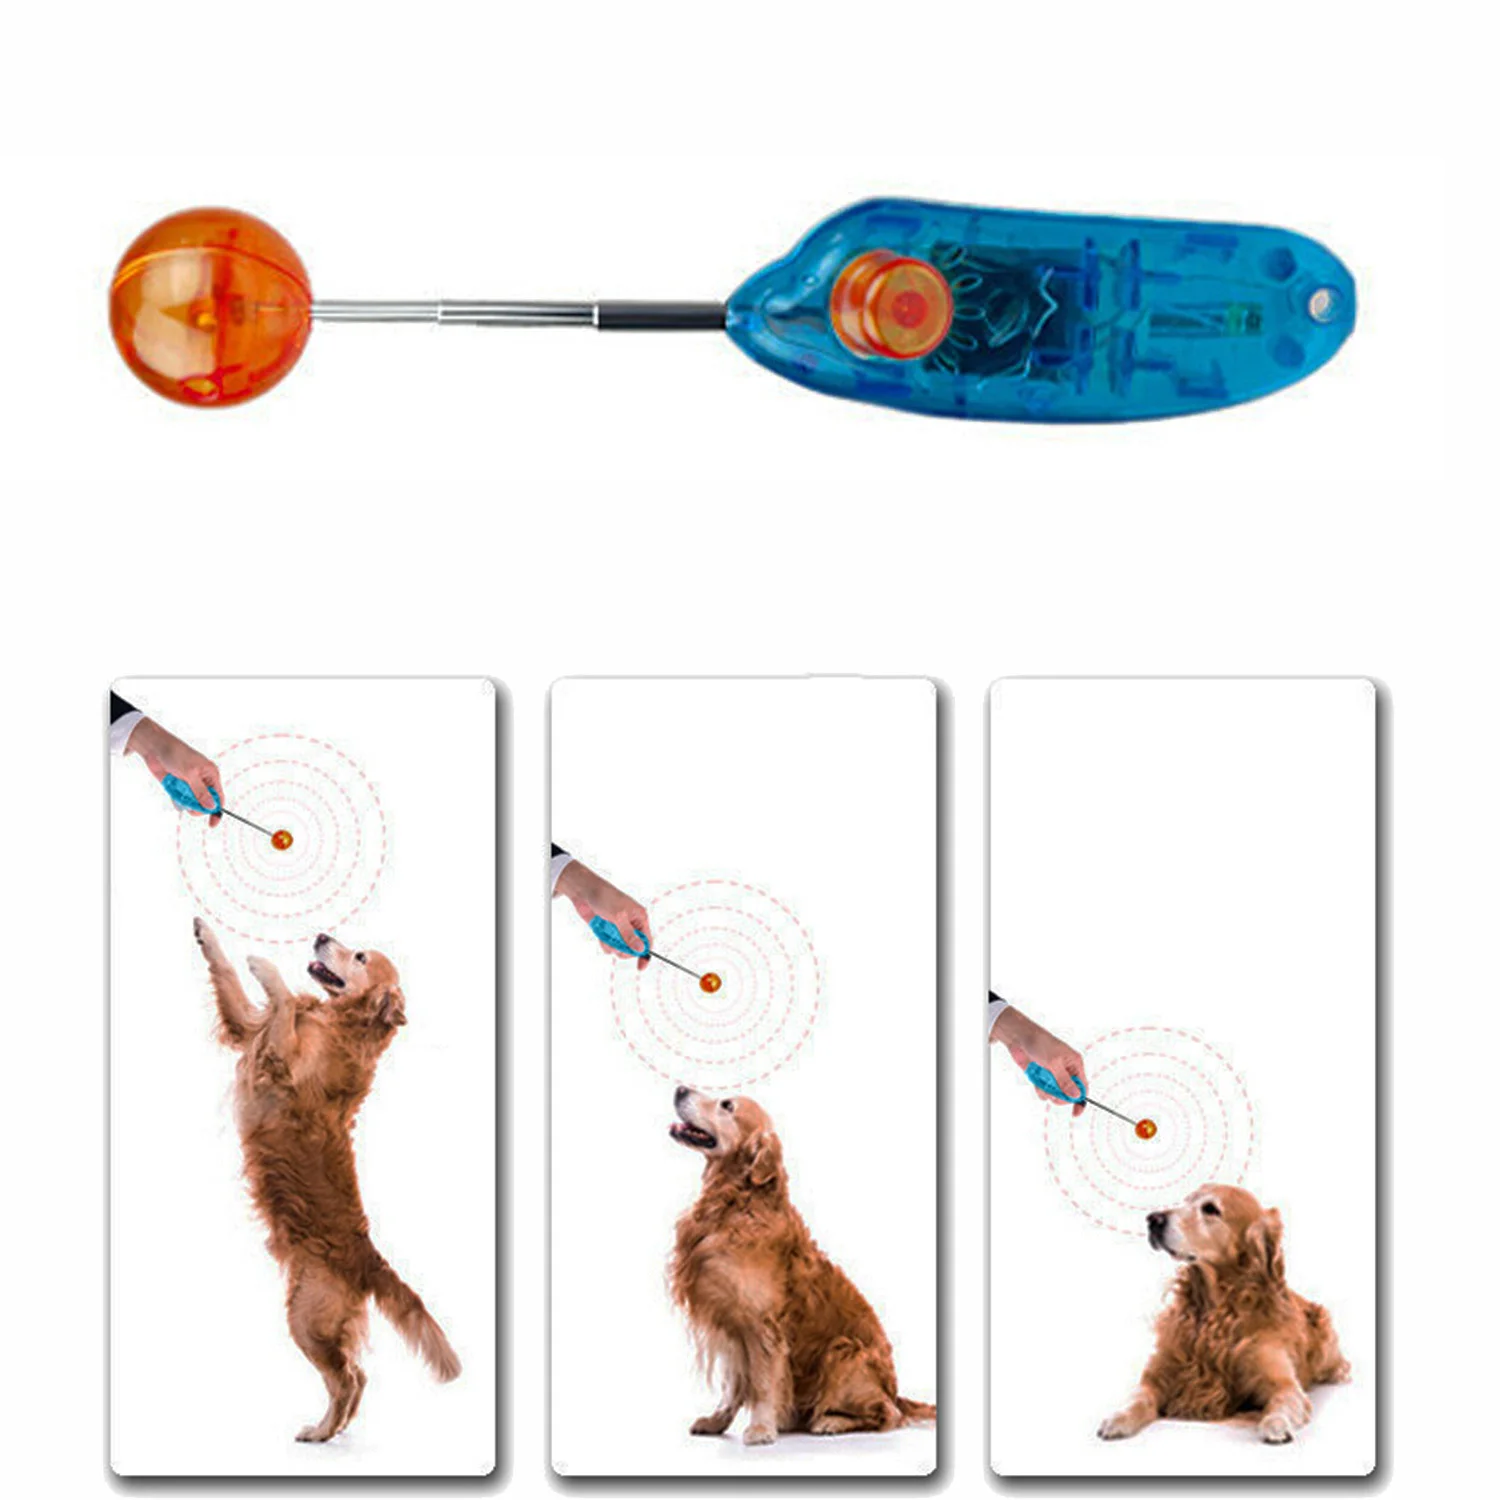 

Behogar Funny Novelty Stretchable Design Pet Dog Cat Training Clicker Agility Clickers Bird Whistle Commander Supply Accessory